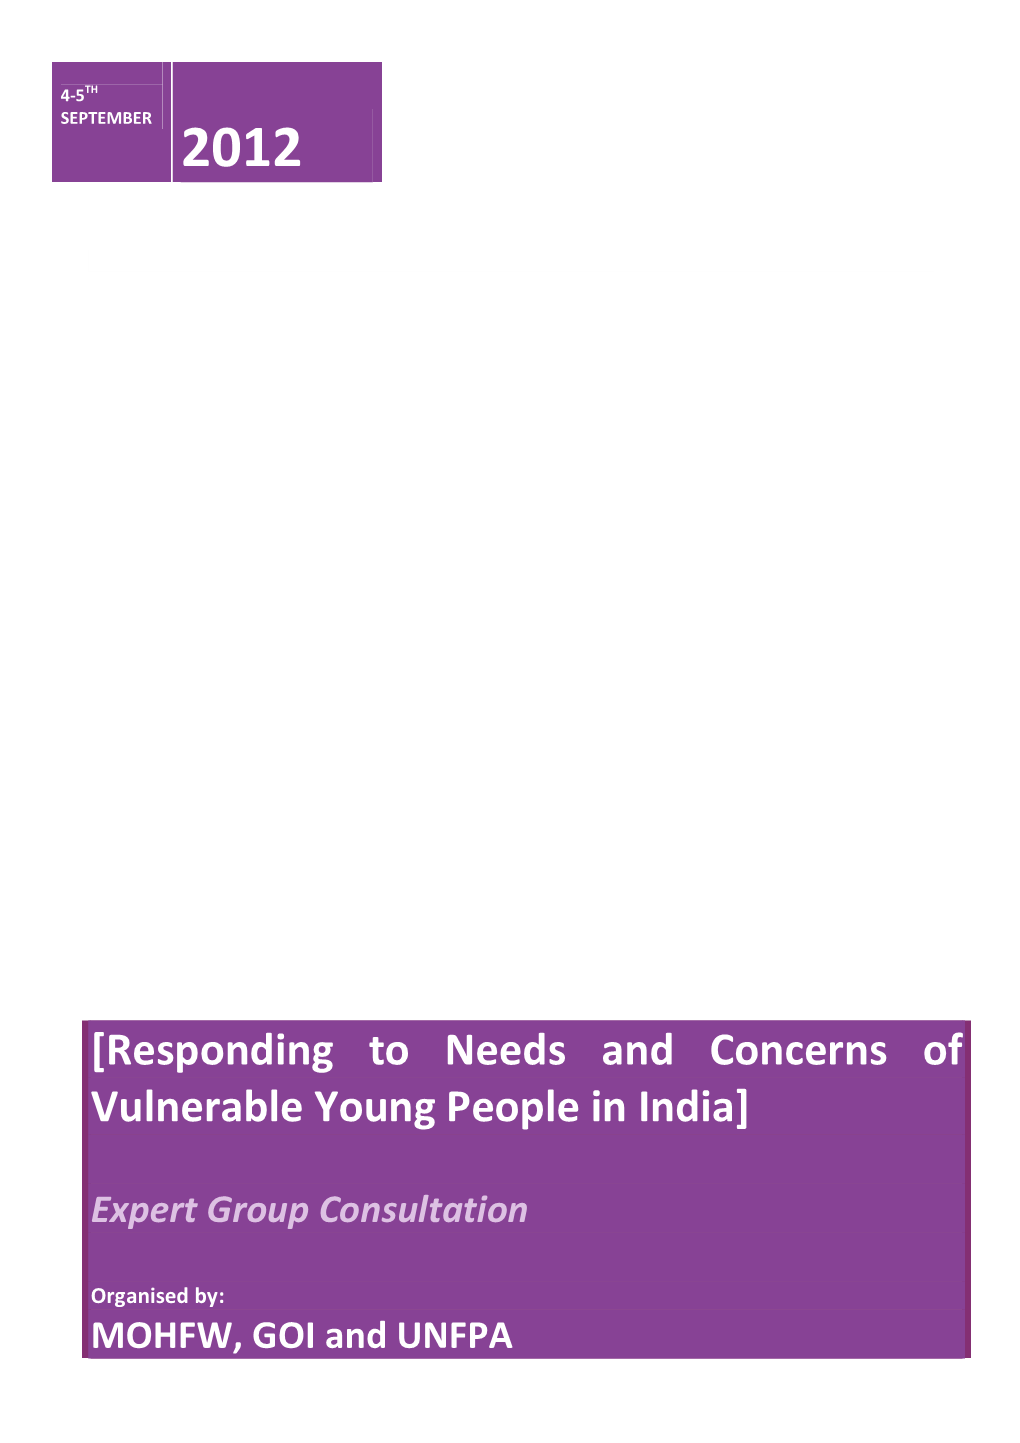 [Responding to Needs and Concerns of Vulnerable Young People in India]